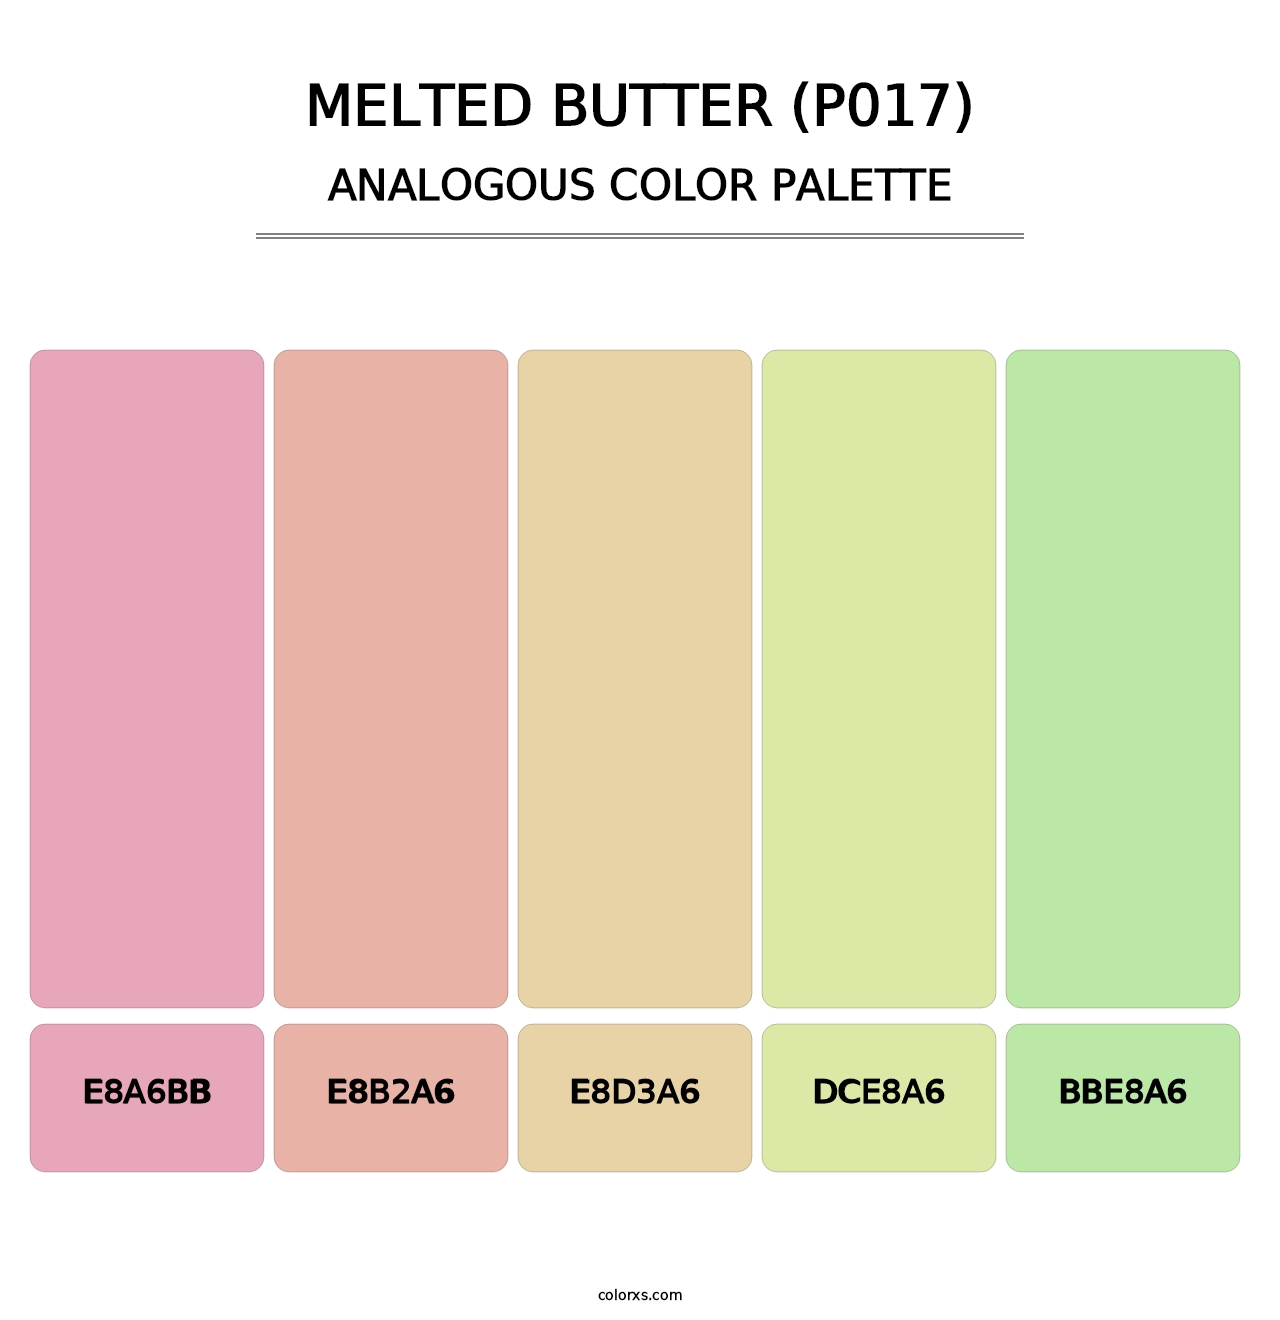 Melted Butter (P017) - Analogous Color Palette